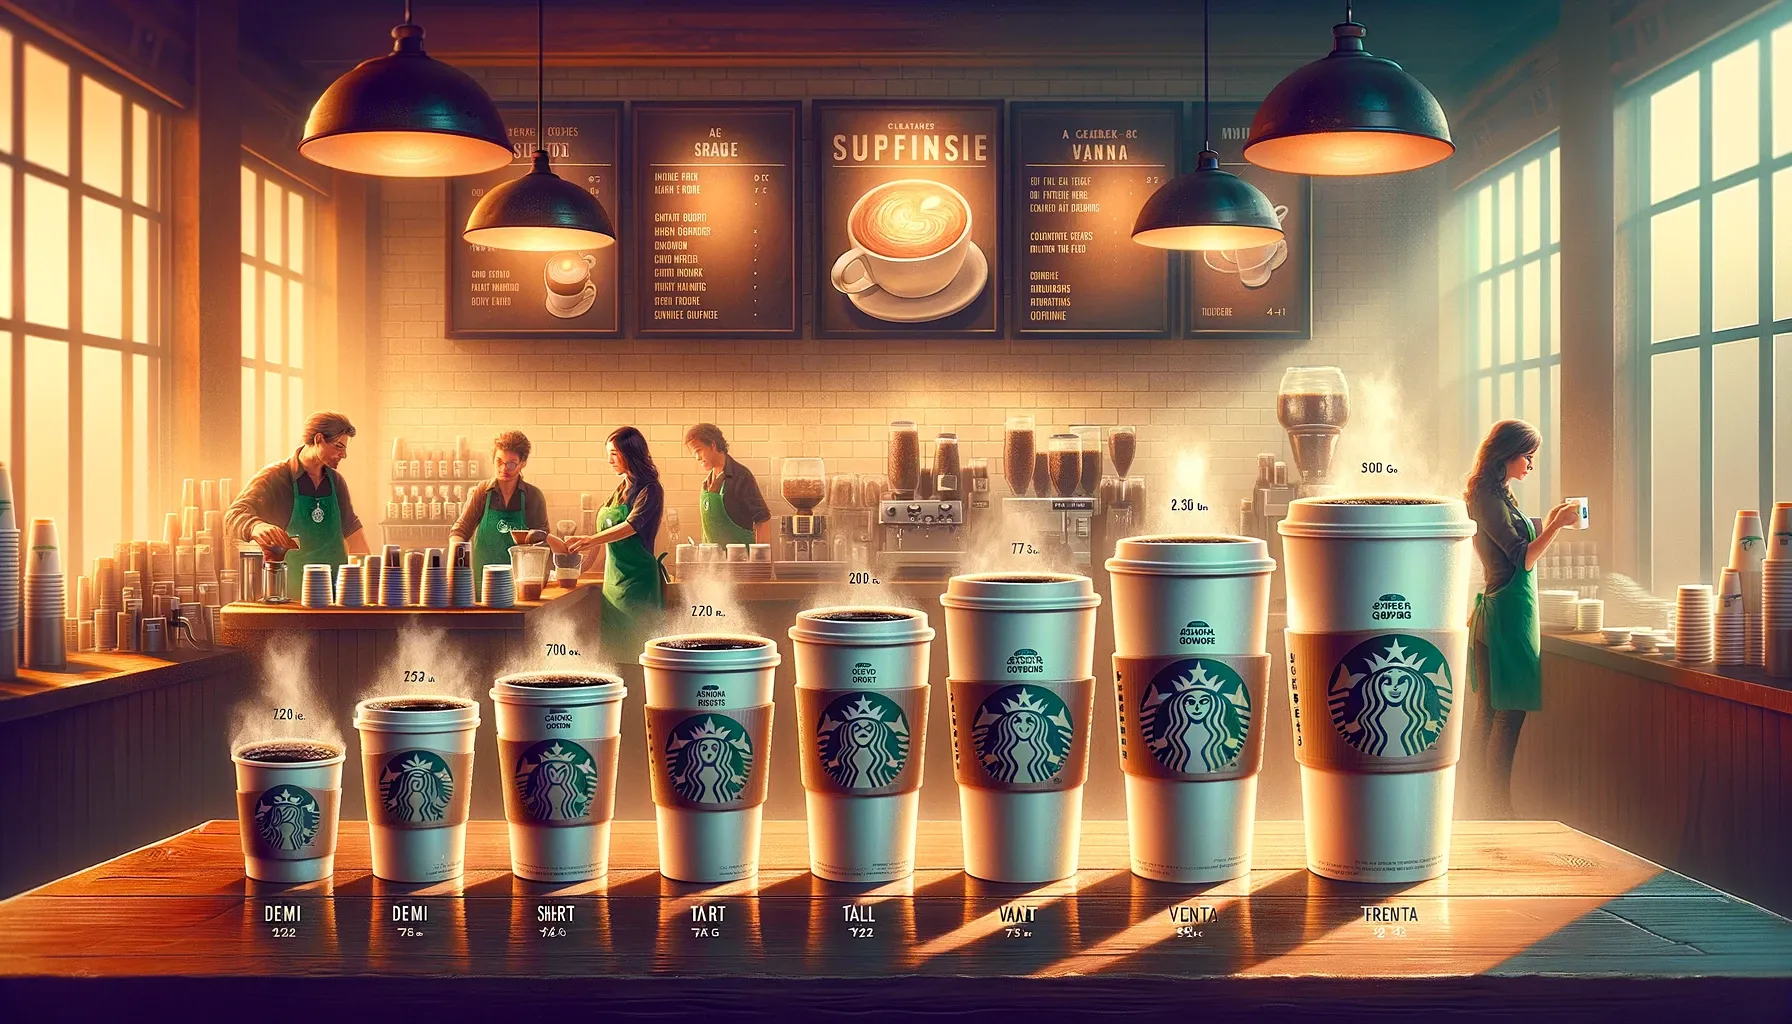 Do All Starbucks Cups Hold the Same Amount of Coffee